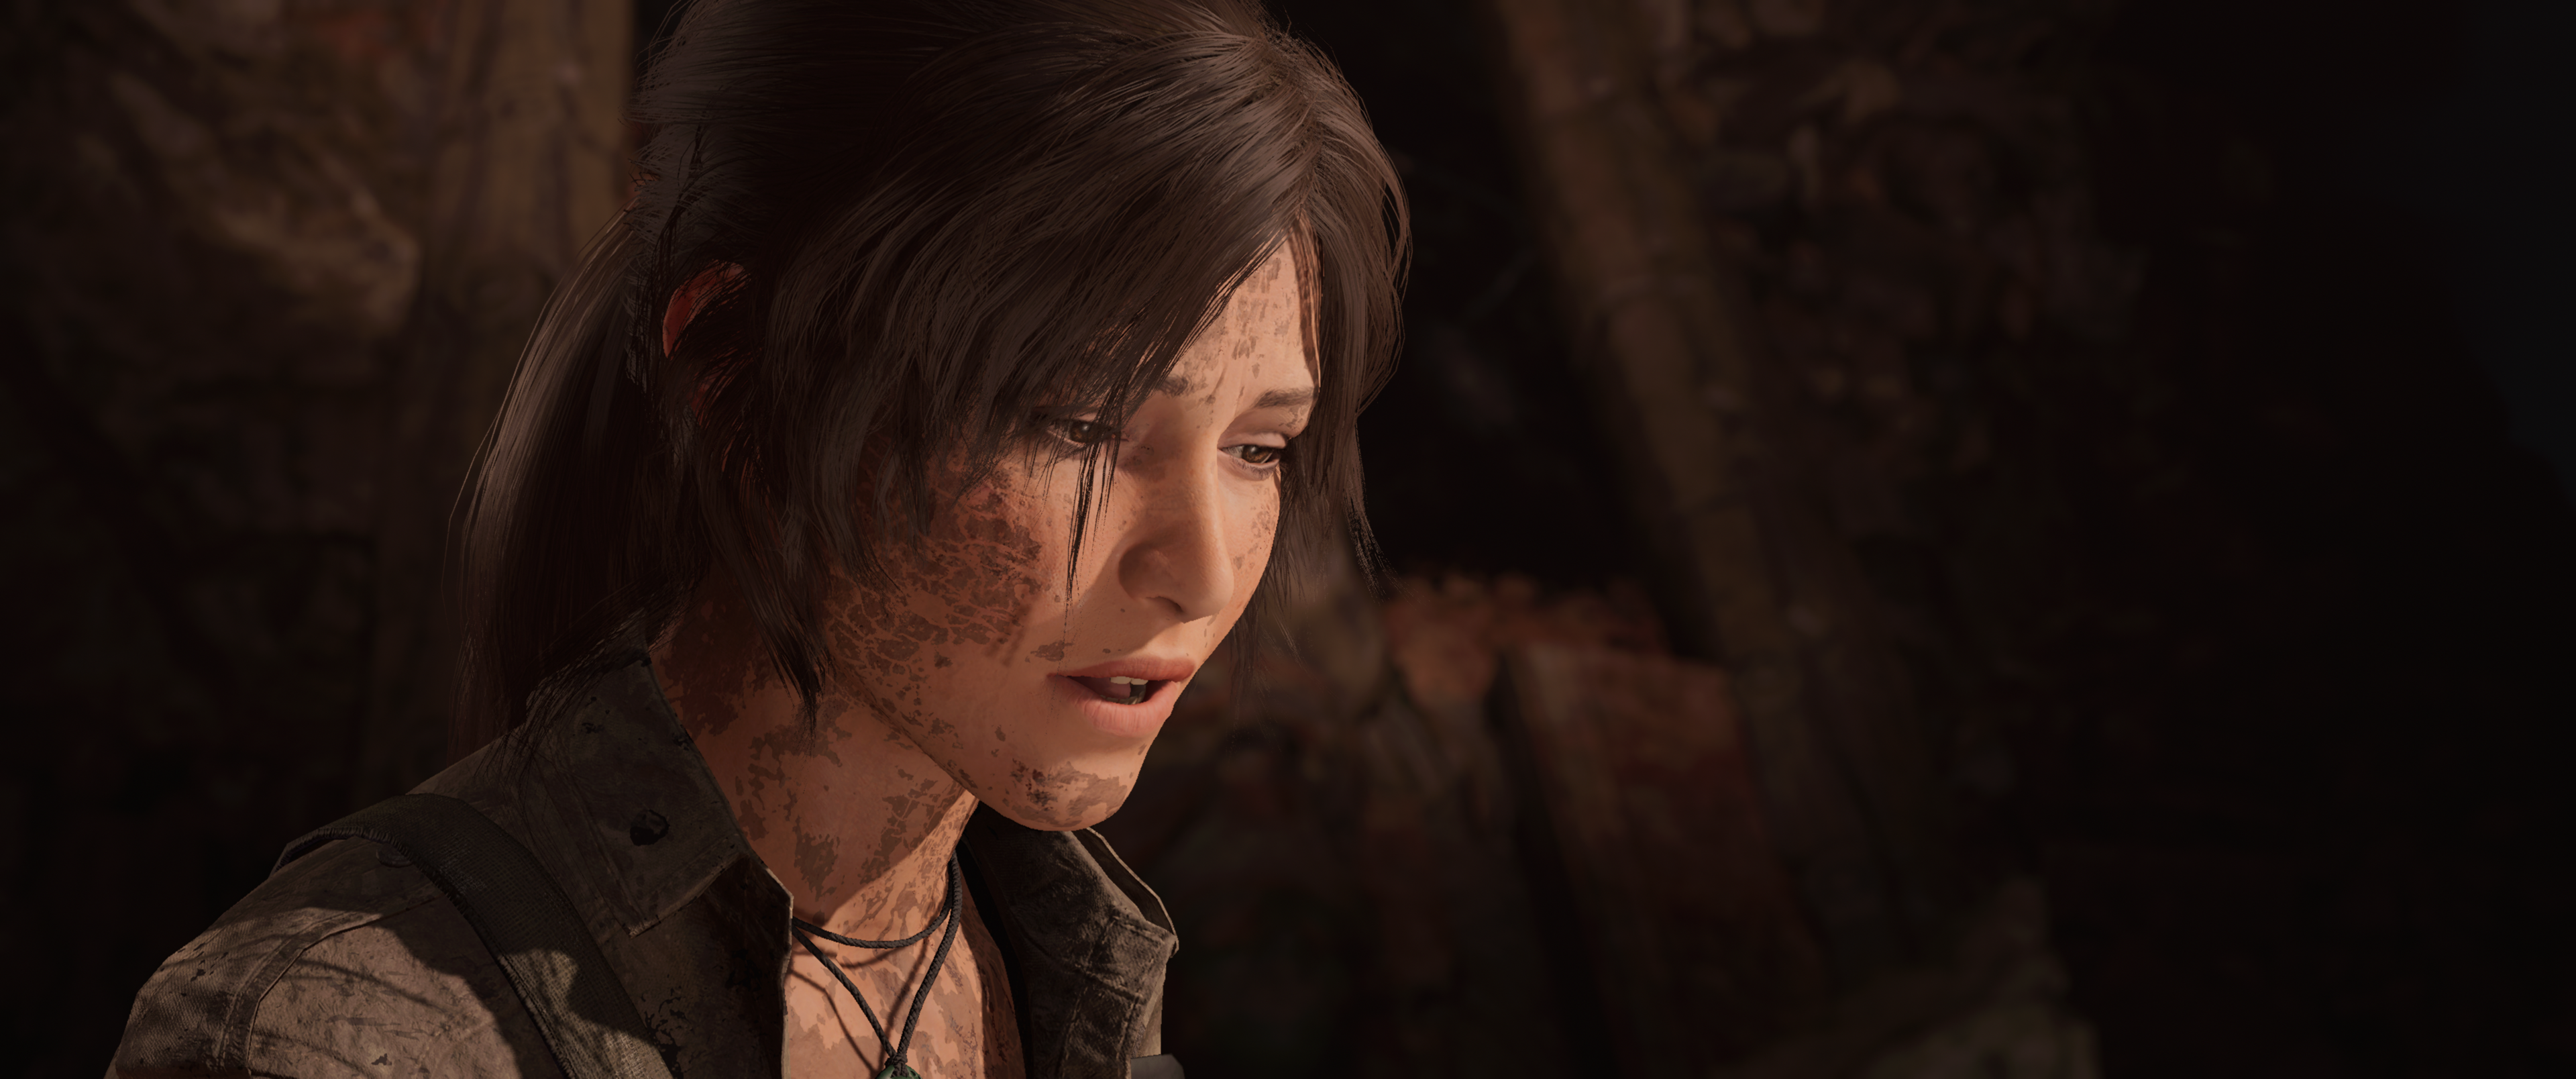 Shadow of the Tomb Raider Super-Resolution 2018.12.14 - 18.33.48.76.png